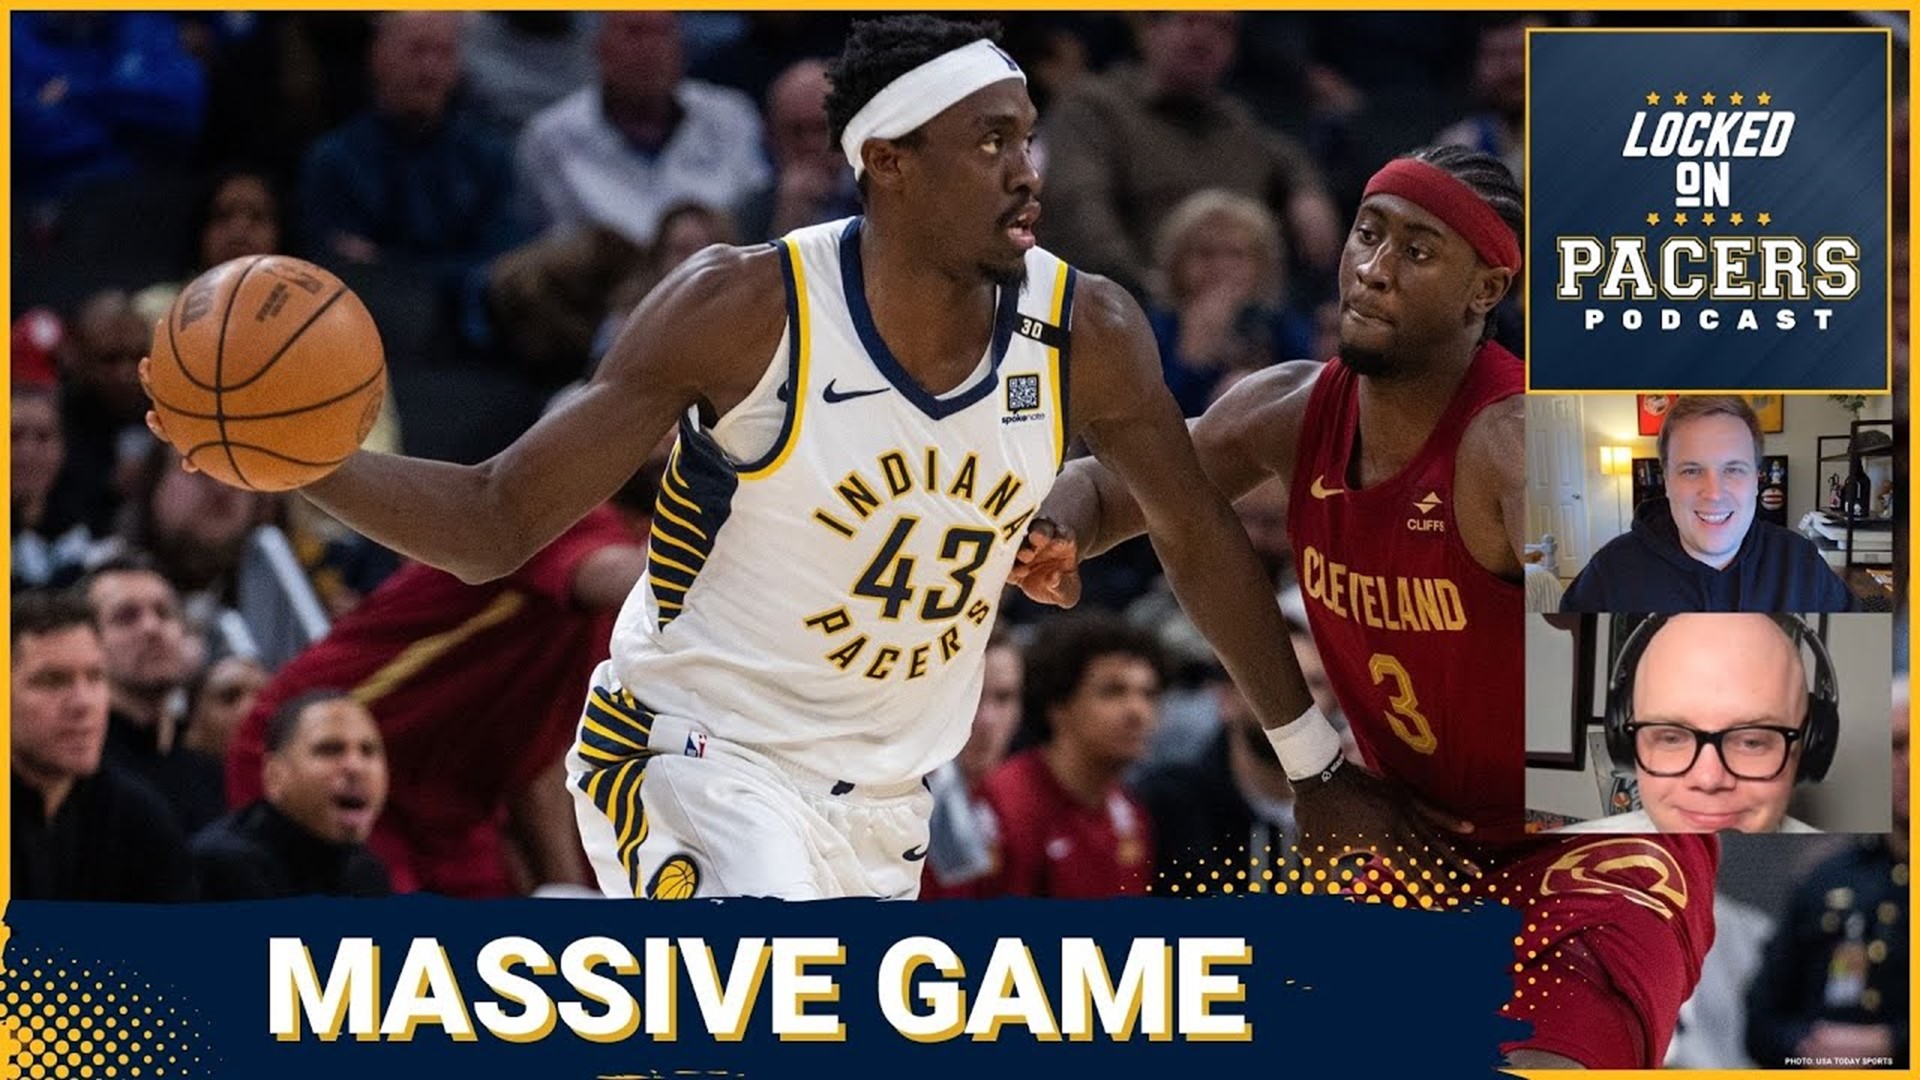 Keys for the Indiana Pacers tonight in potential playoffs-clinching game vs the Cleveland Cavaliers